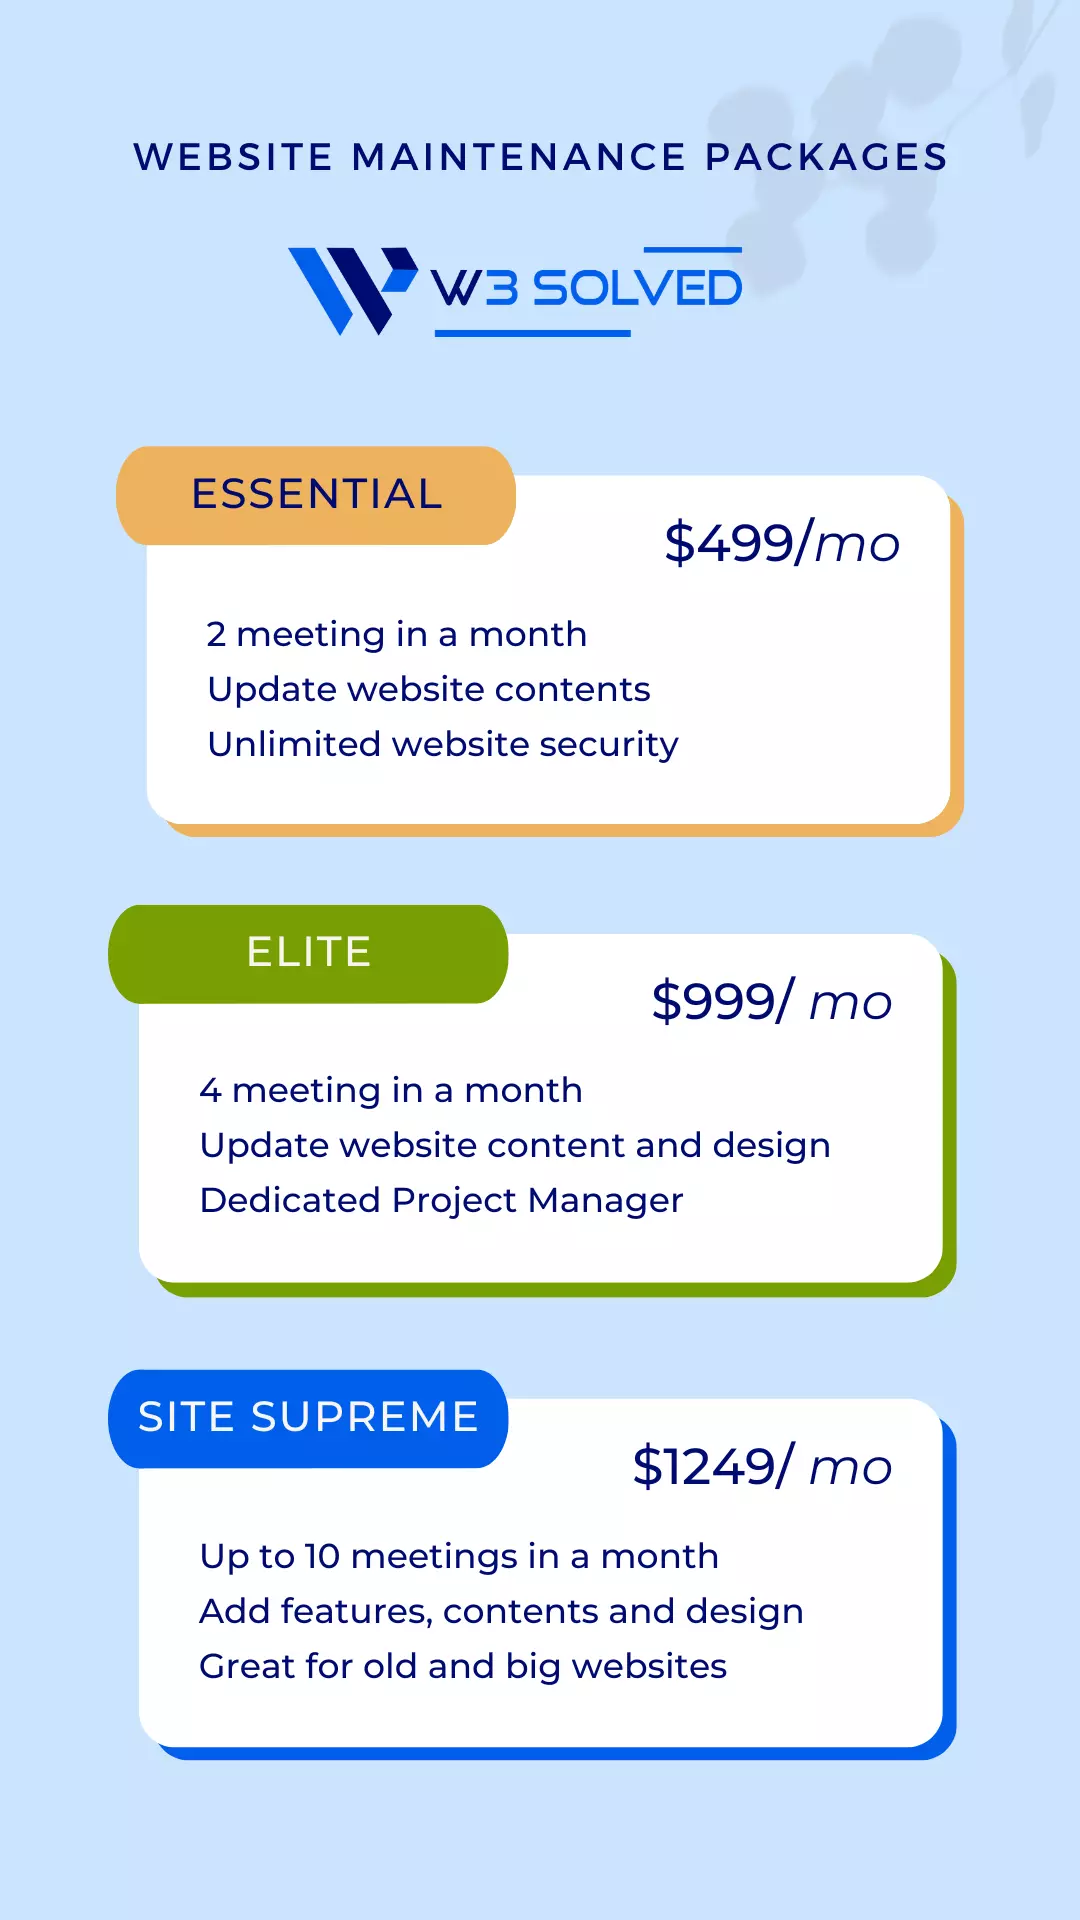 Monthly website maintenance packages